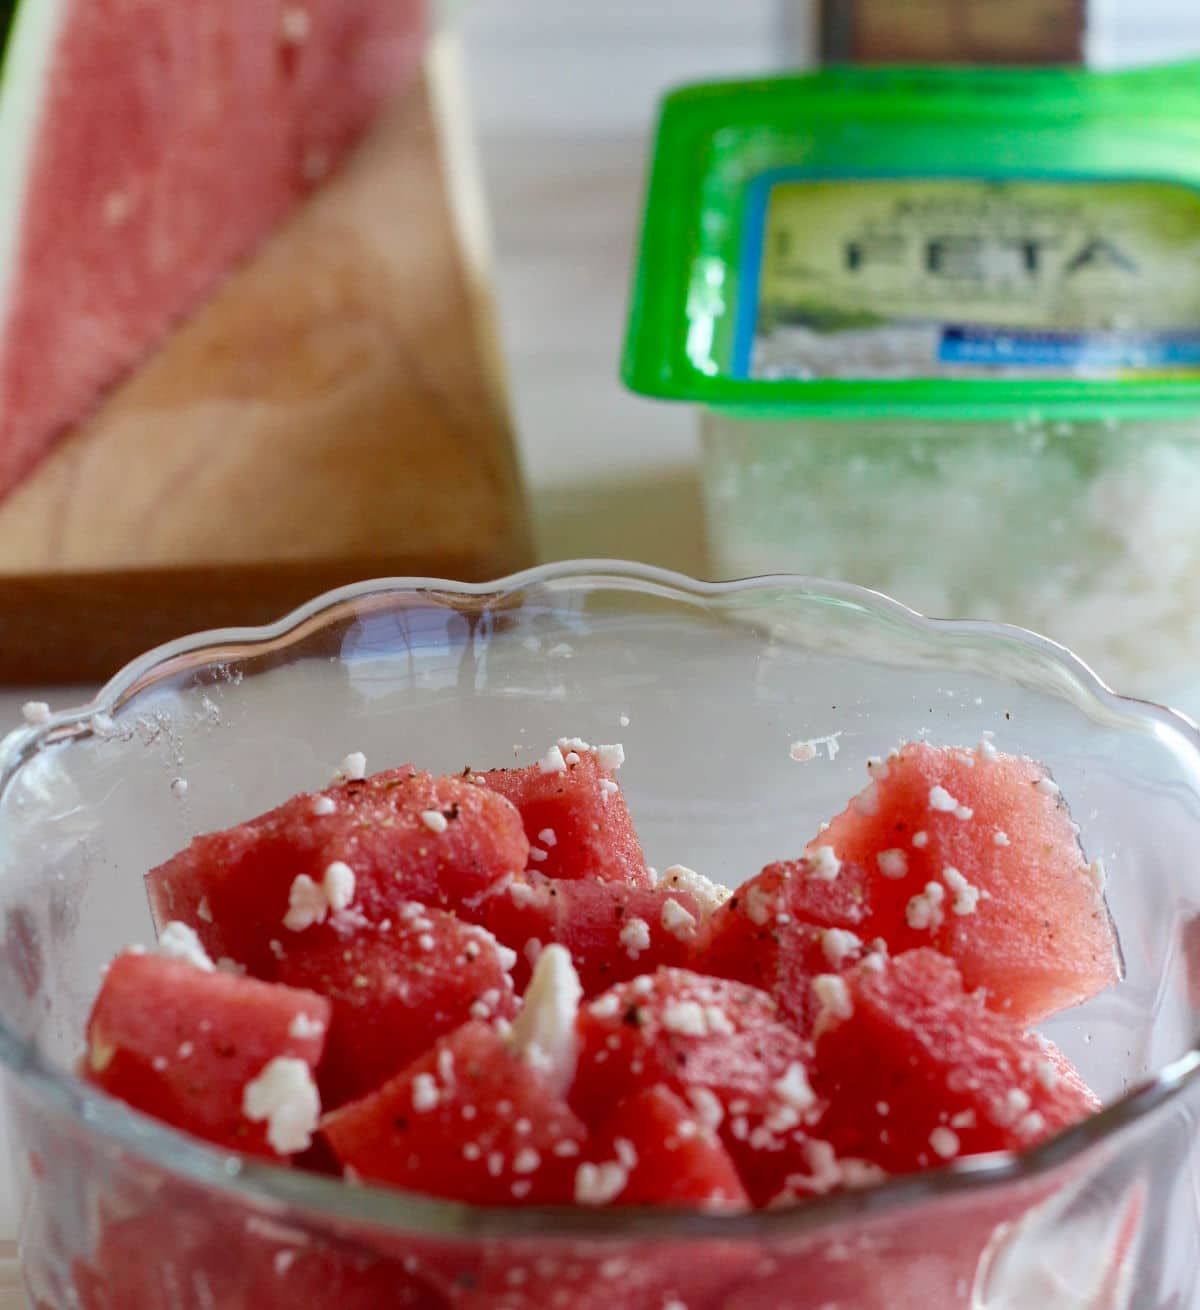 ripe watermelon chunks with feta crumbles and ground black pepper.